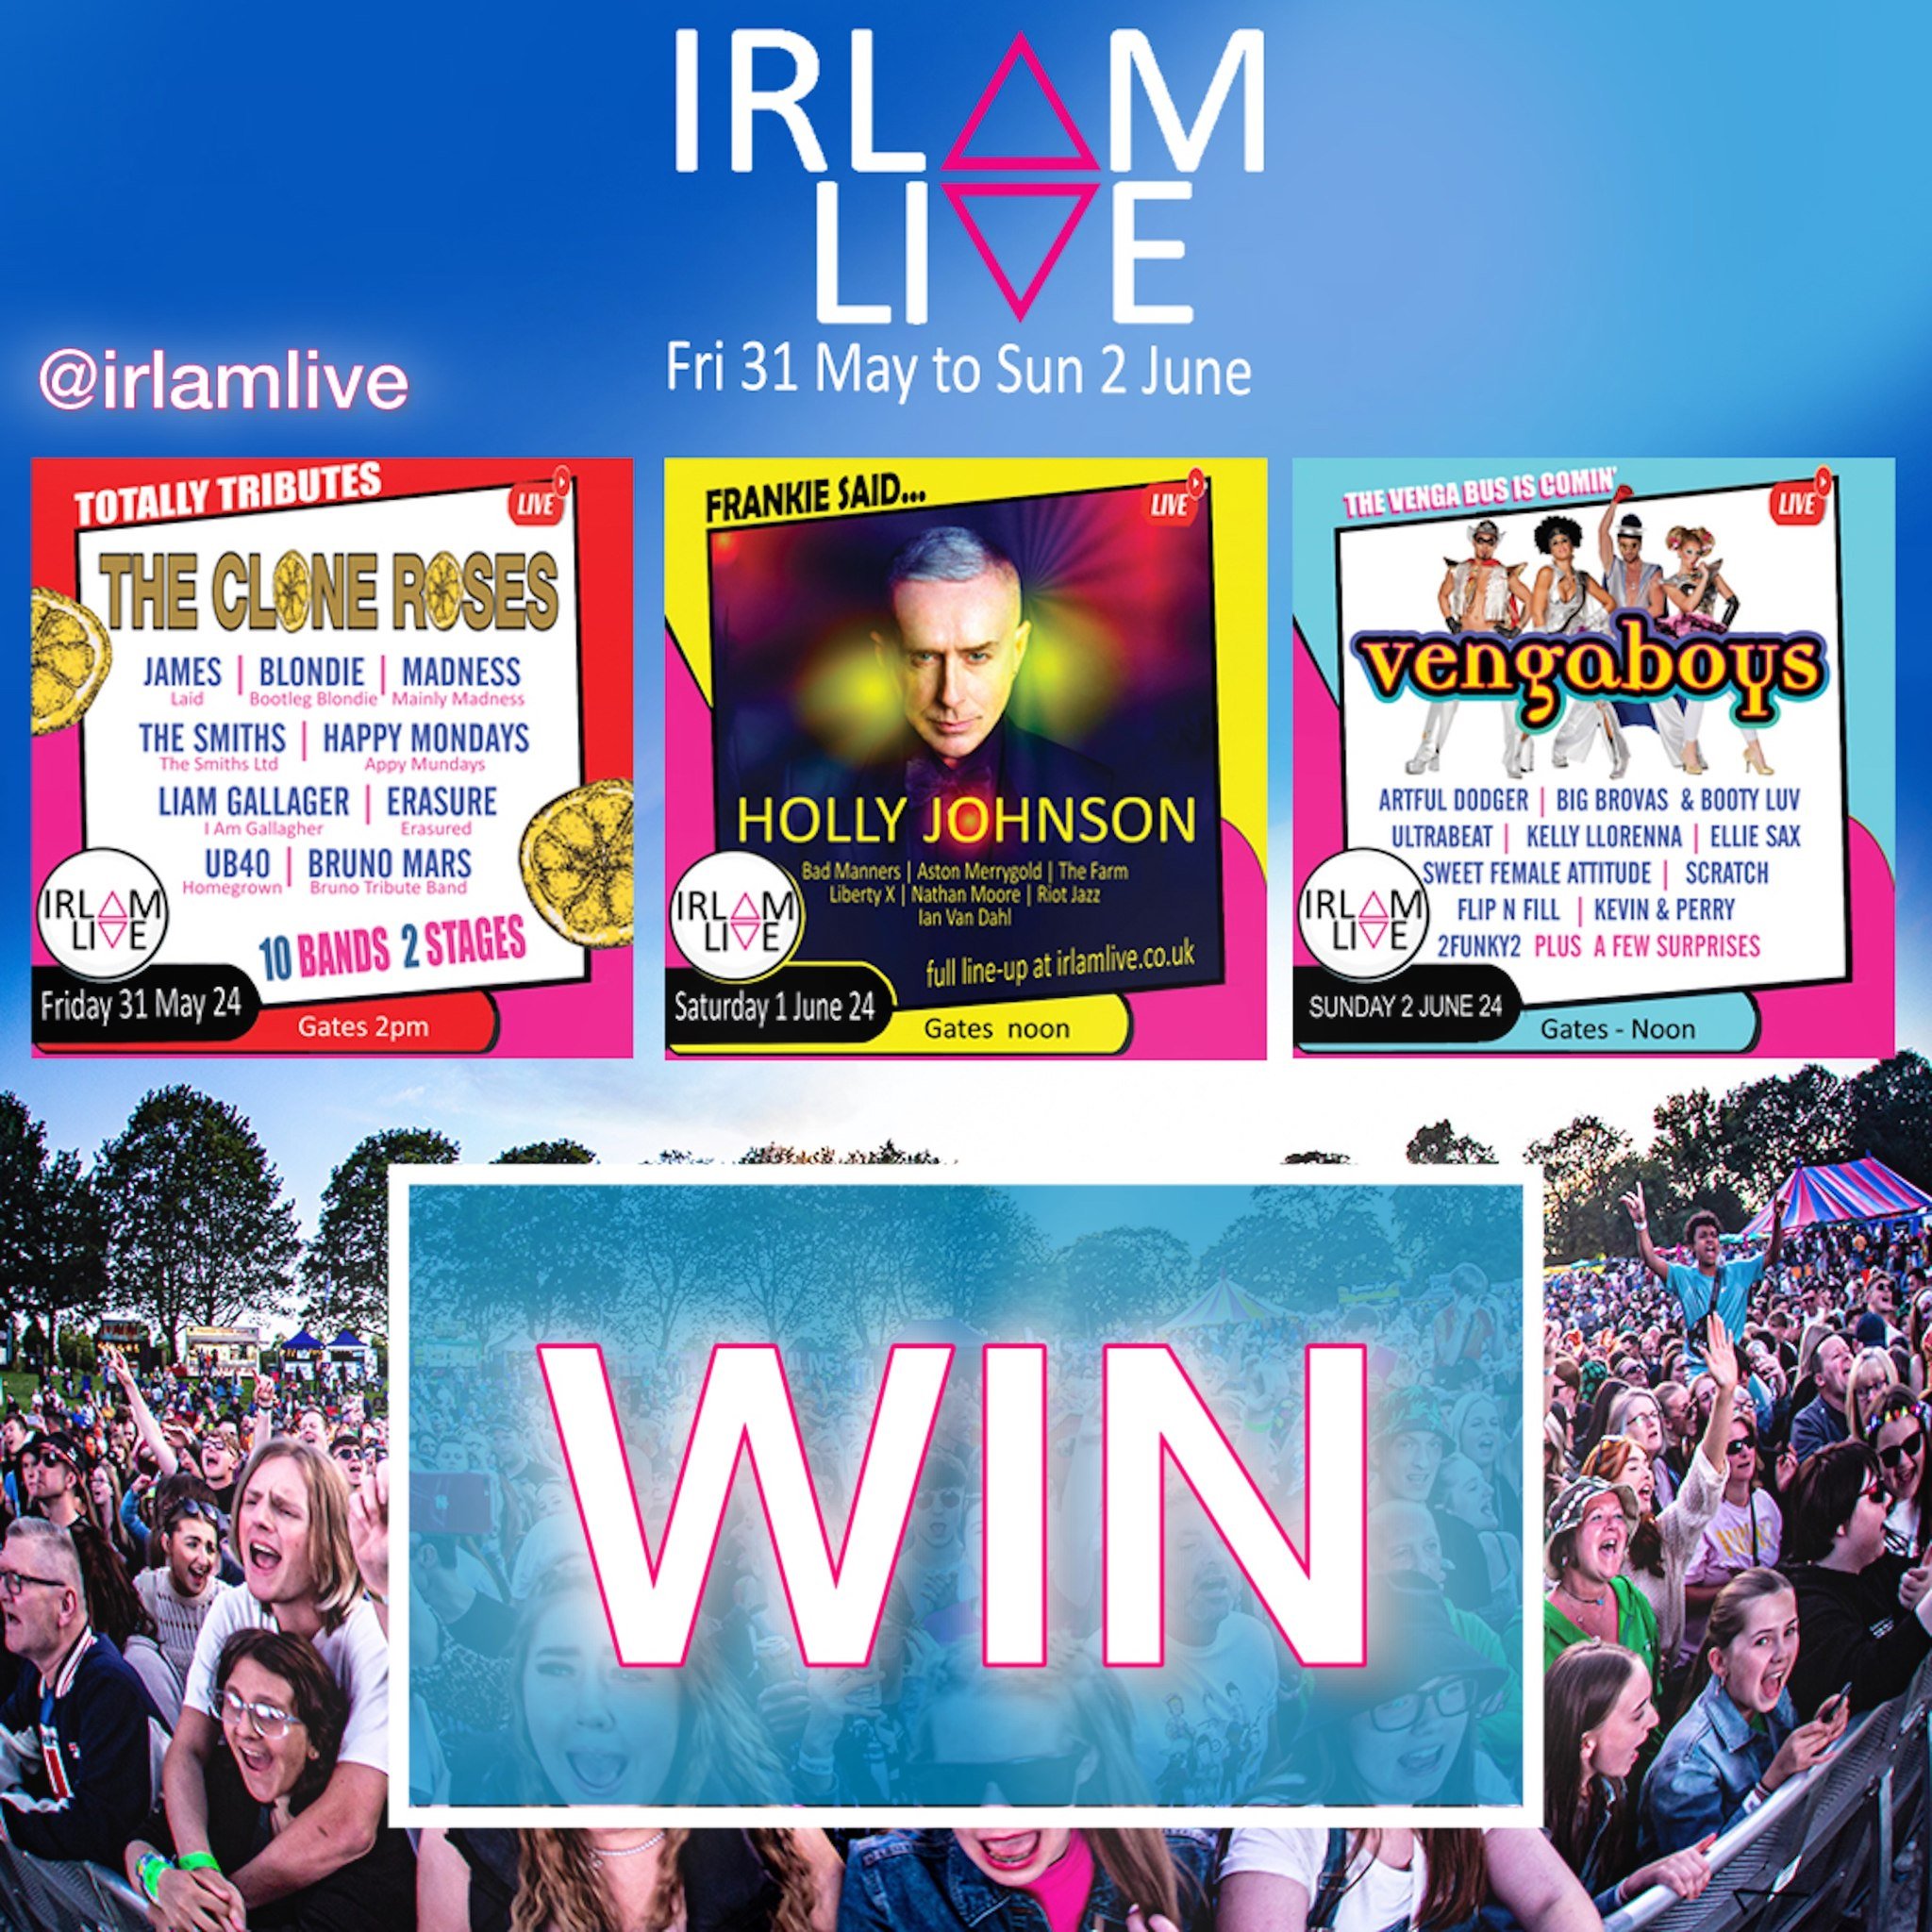 ✨🥳 #competitiontime - WIN TWO TICKETS TO IRLAM LIVE 2024 🥳✨

To celebrate @irlamlive being back for its eighth great year we&rsquo;re offering 1 lucky winner a Pair of tickets to each day of the festival 

𝐈𝐑𝐋𝐀𝐌 𝐋𝐈𝐕𝐄 𝐢𝐬 𝐛𝐚𝐜𝐤 𝐟𝐨𝐫 ?